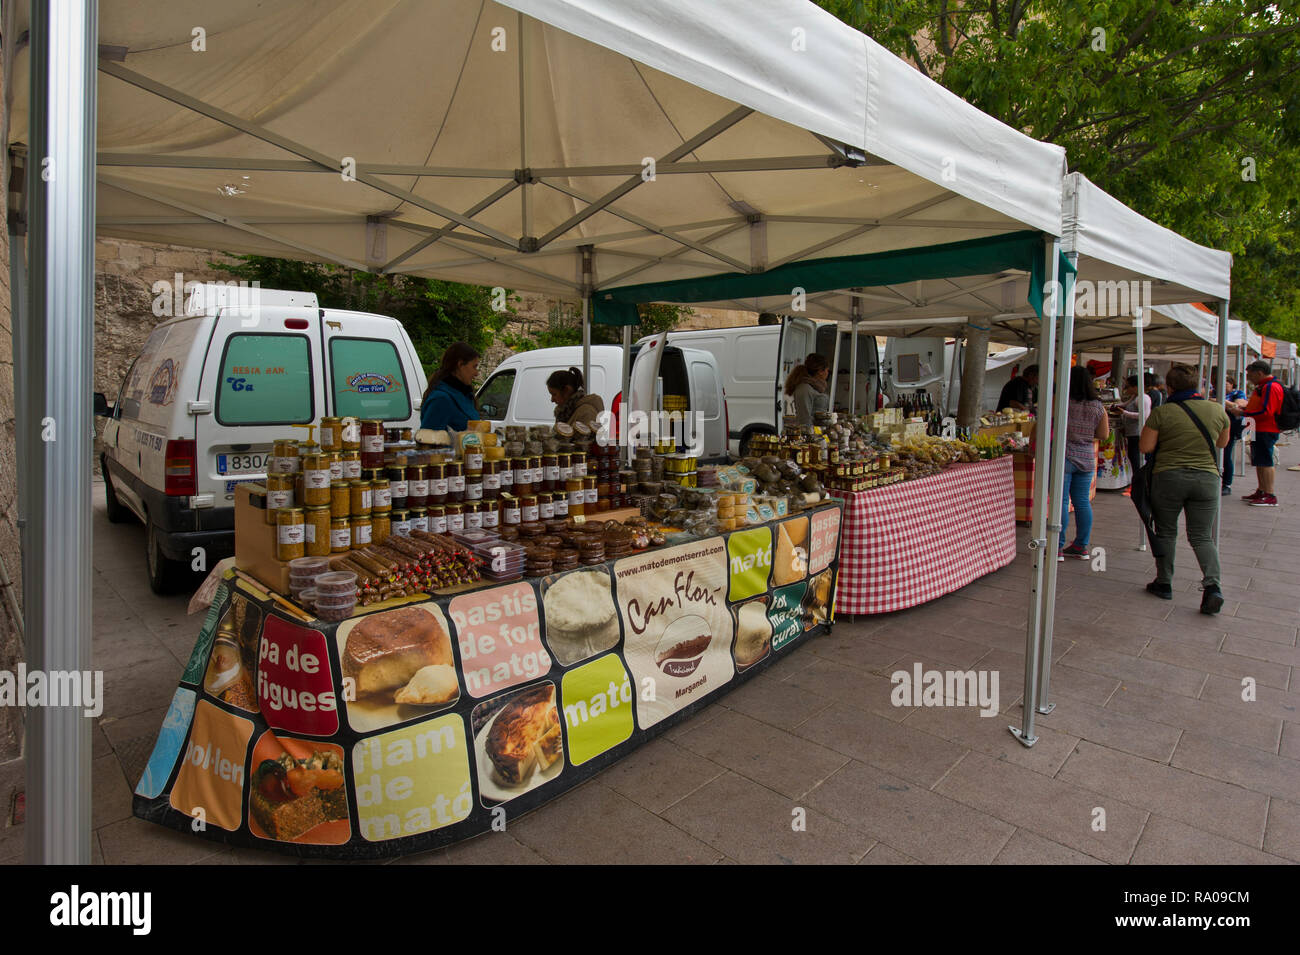 A small stall selling local produce from Montserrat, Barcelona, Spain Stock Photo